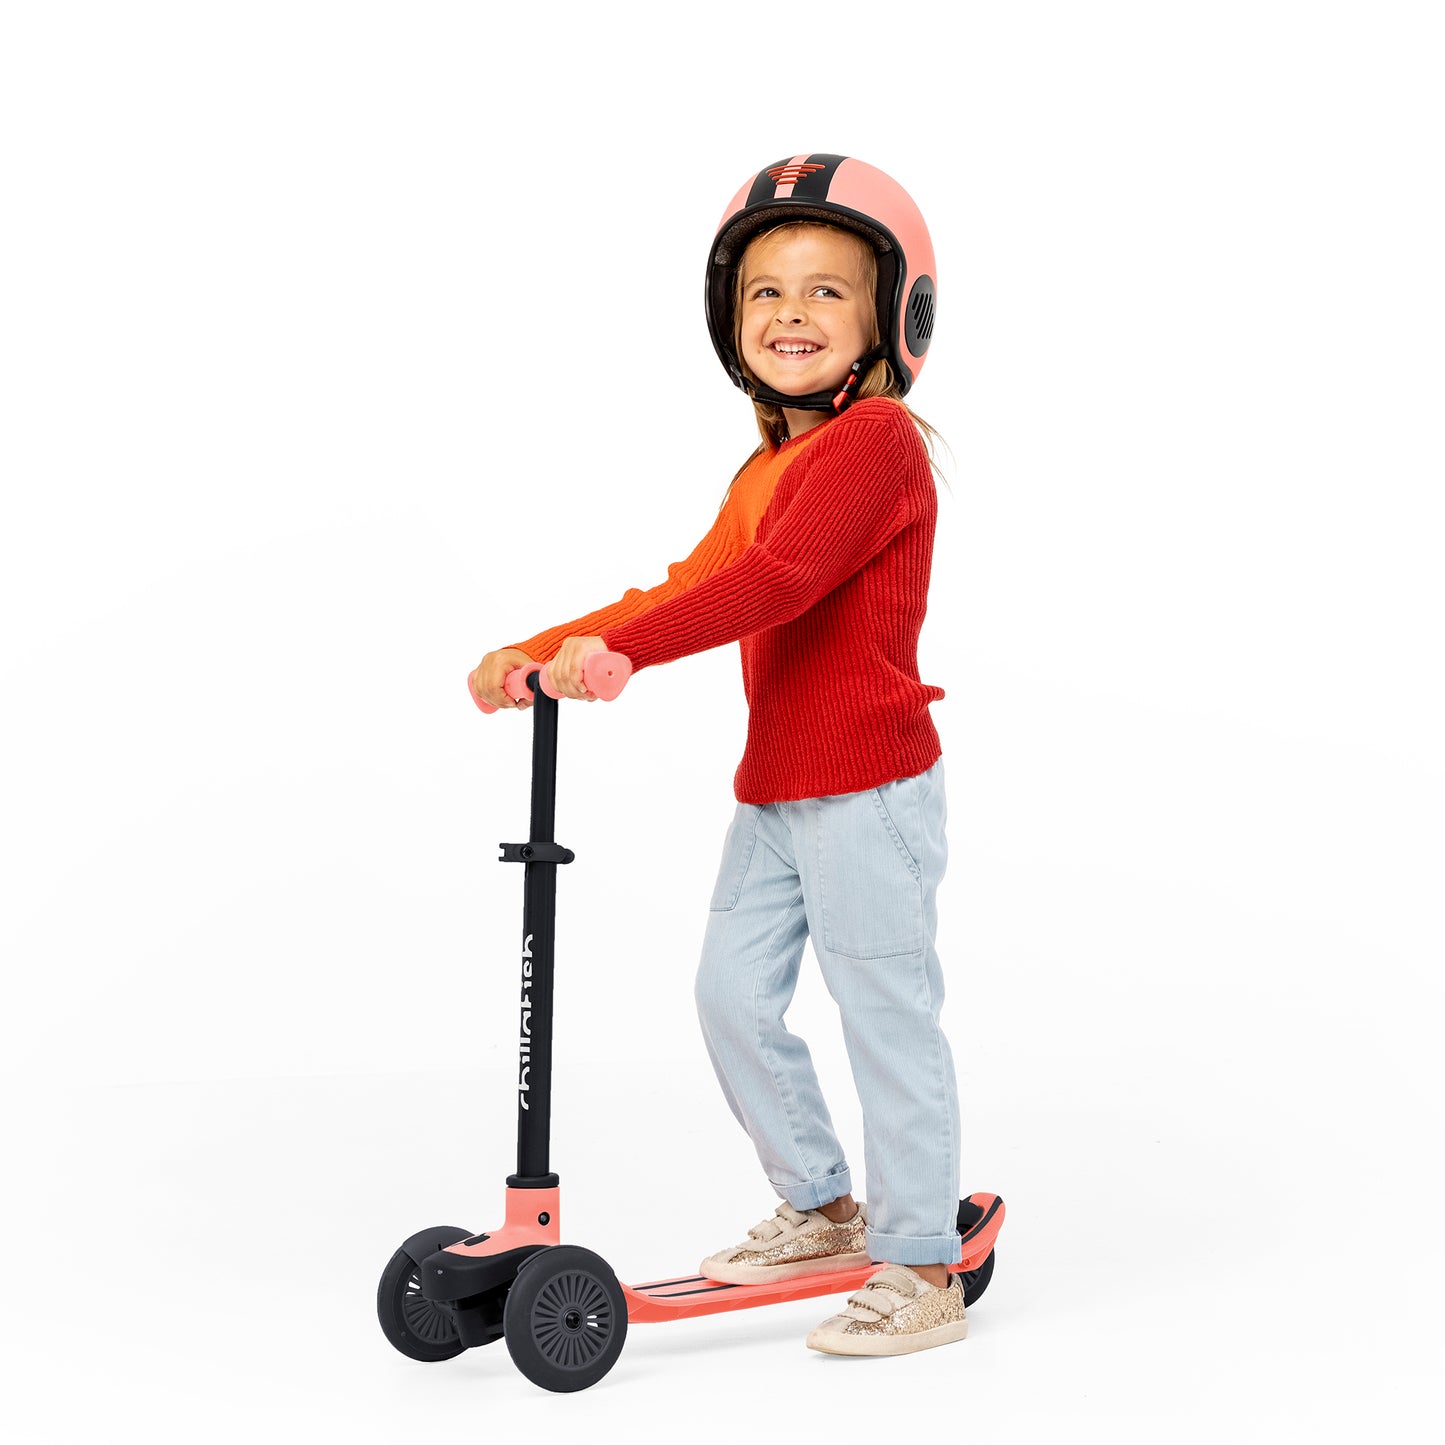 Scotti lean-to-steer scooter with integrated brake.